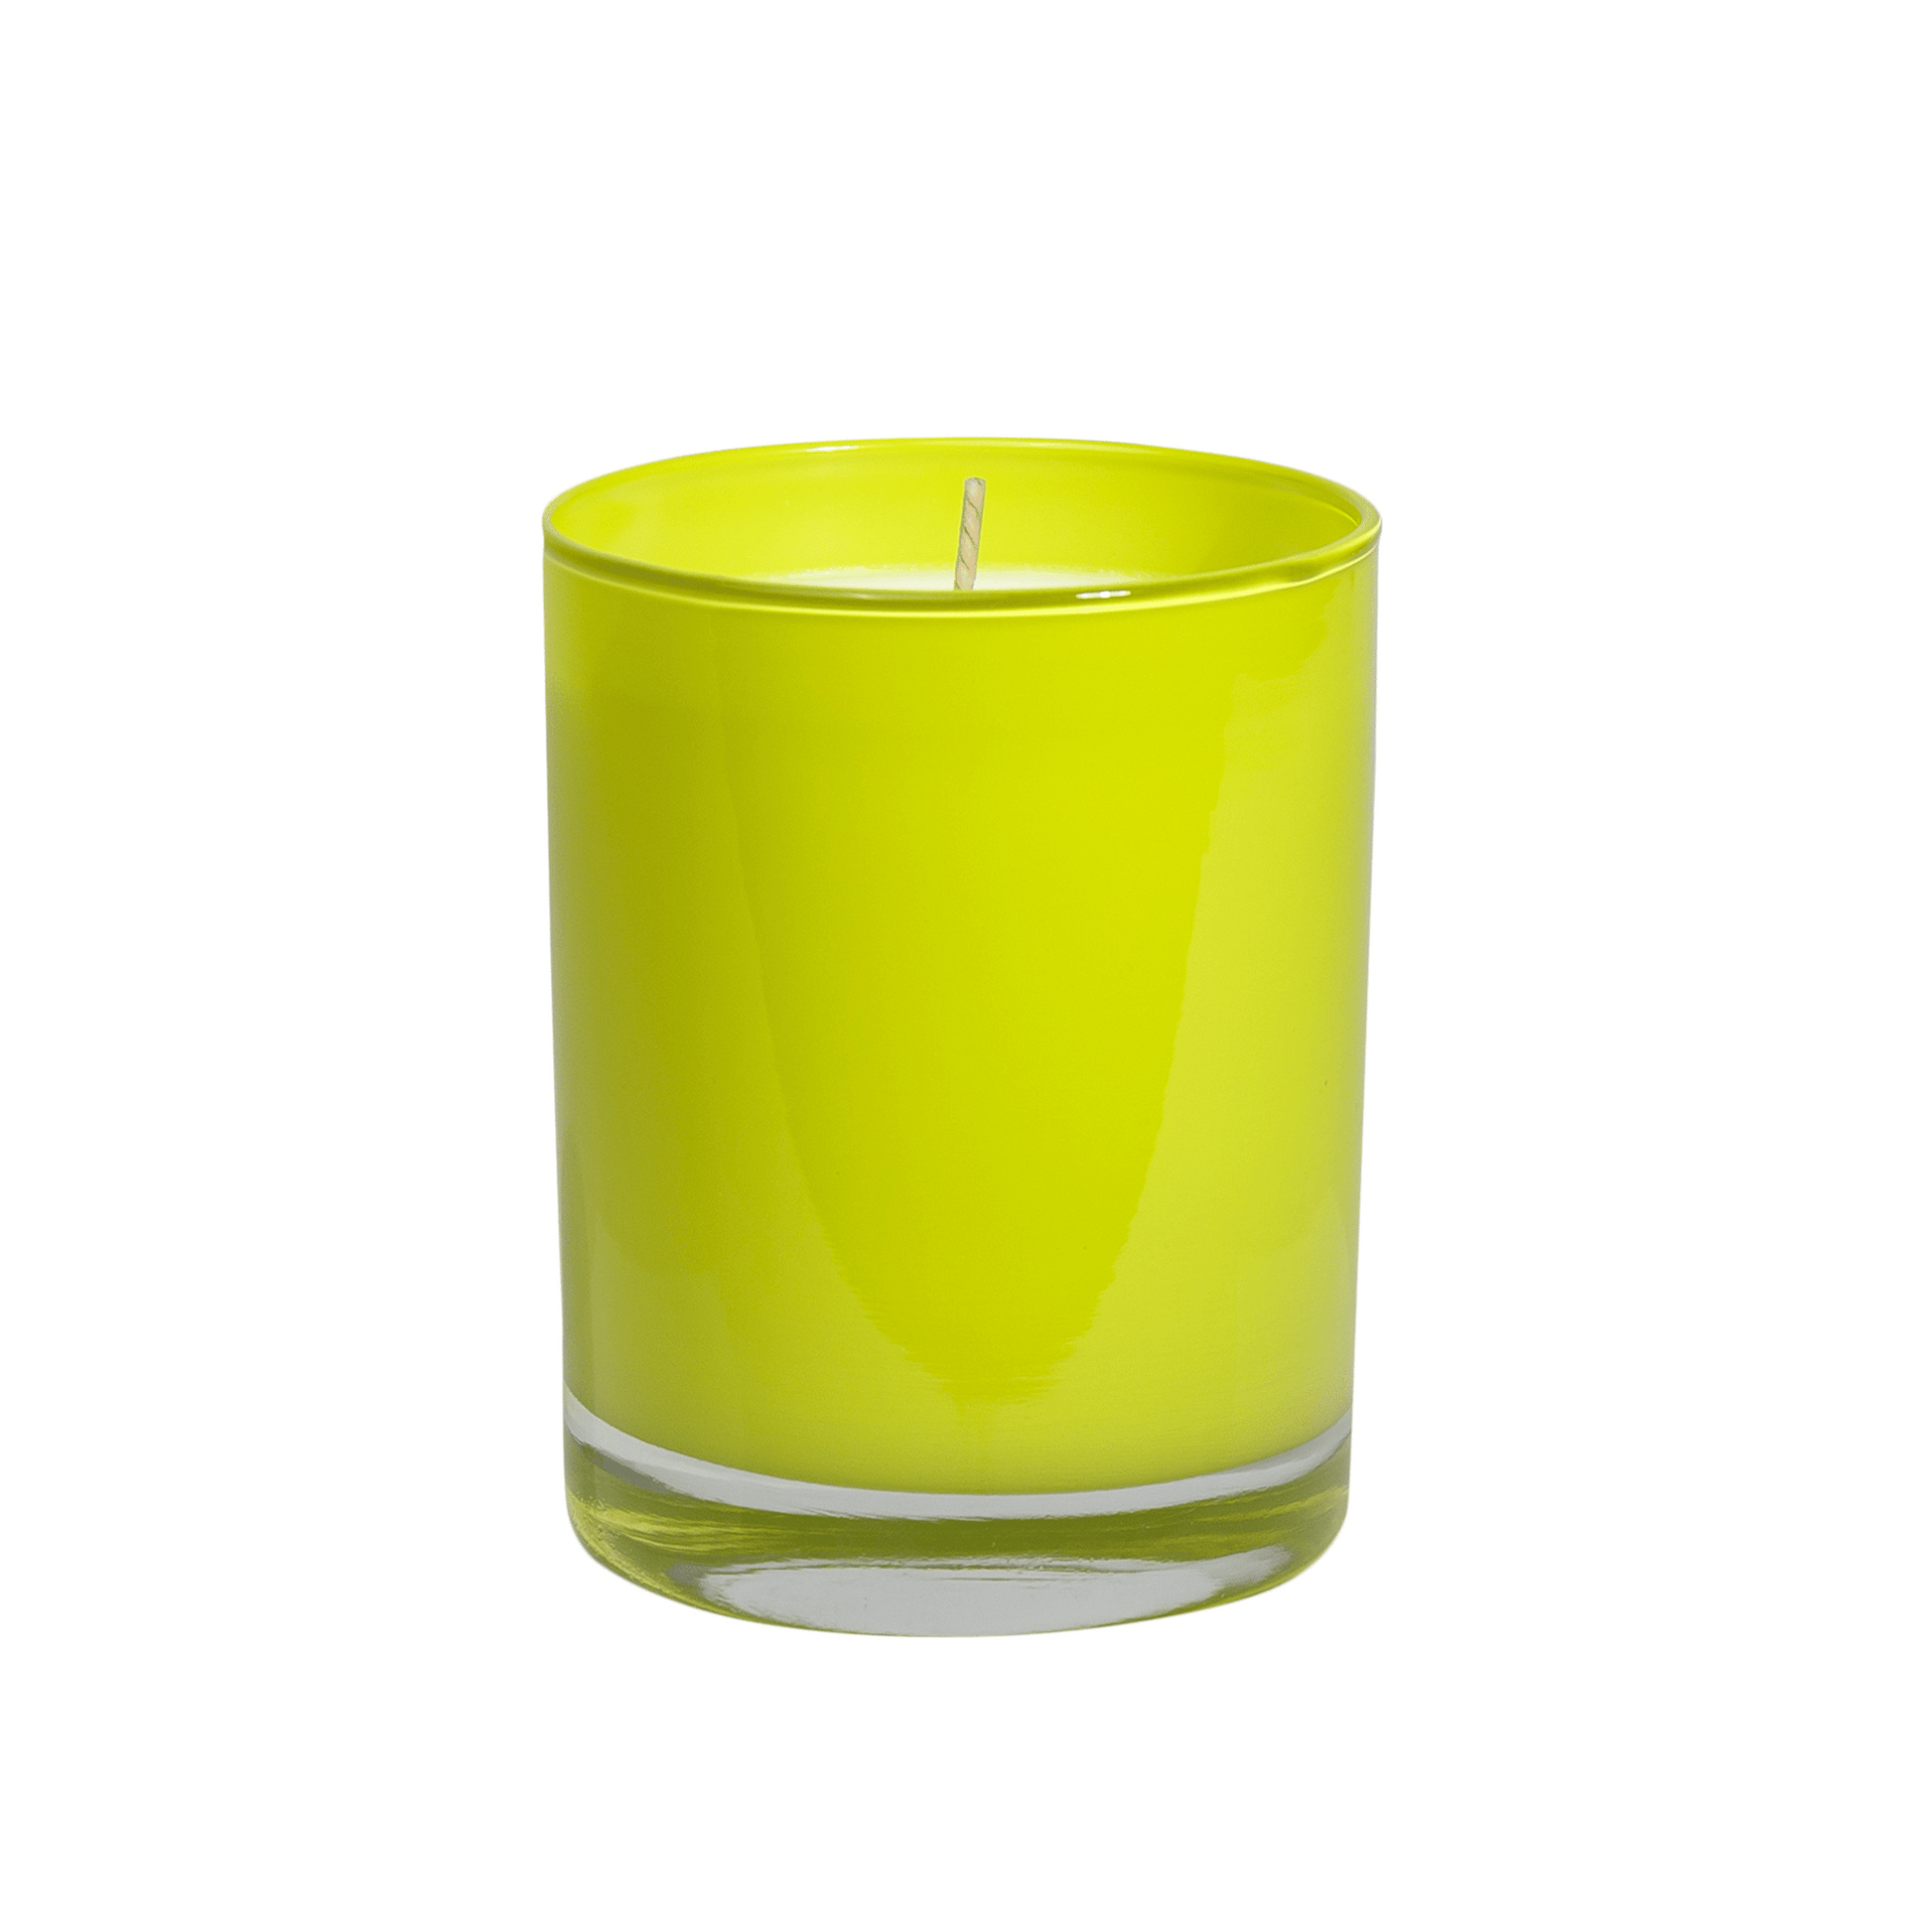 Alternate Image of Oasis Road Trip 11 oz. Pure Soy Candle